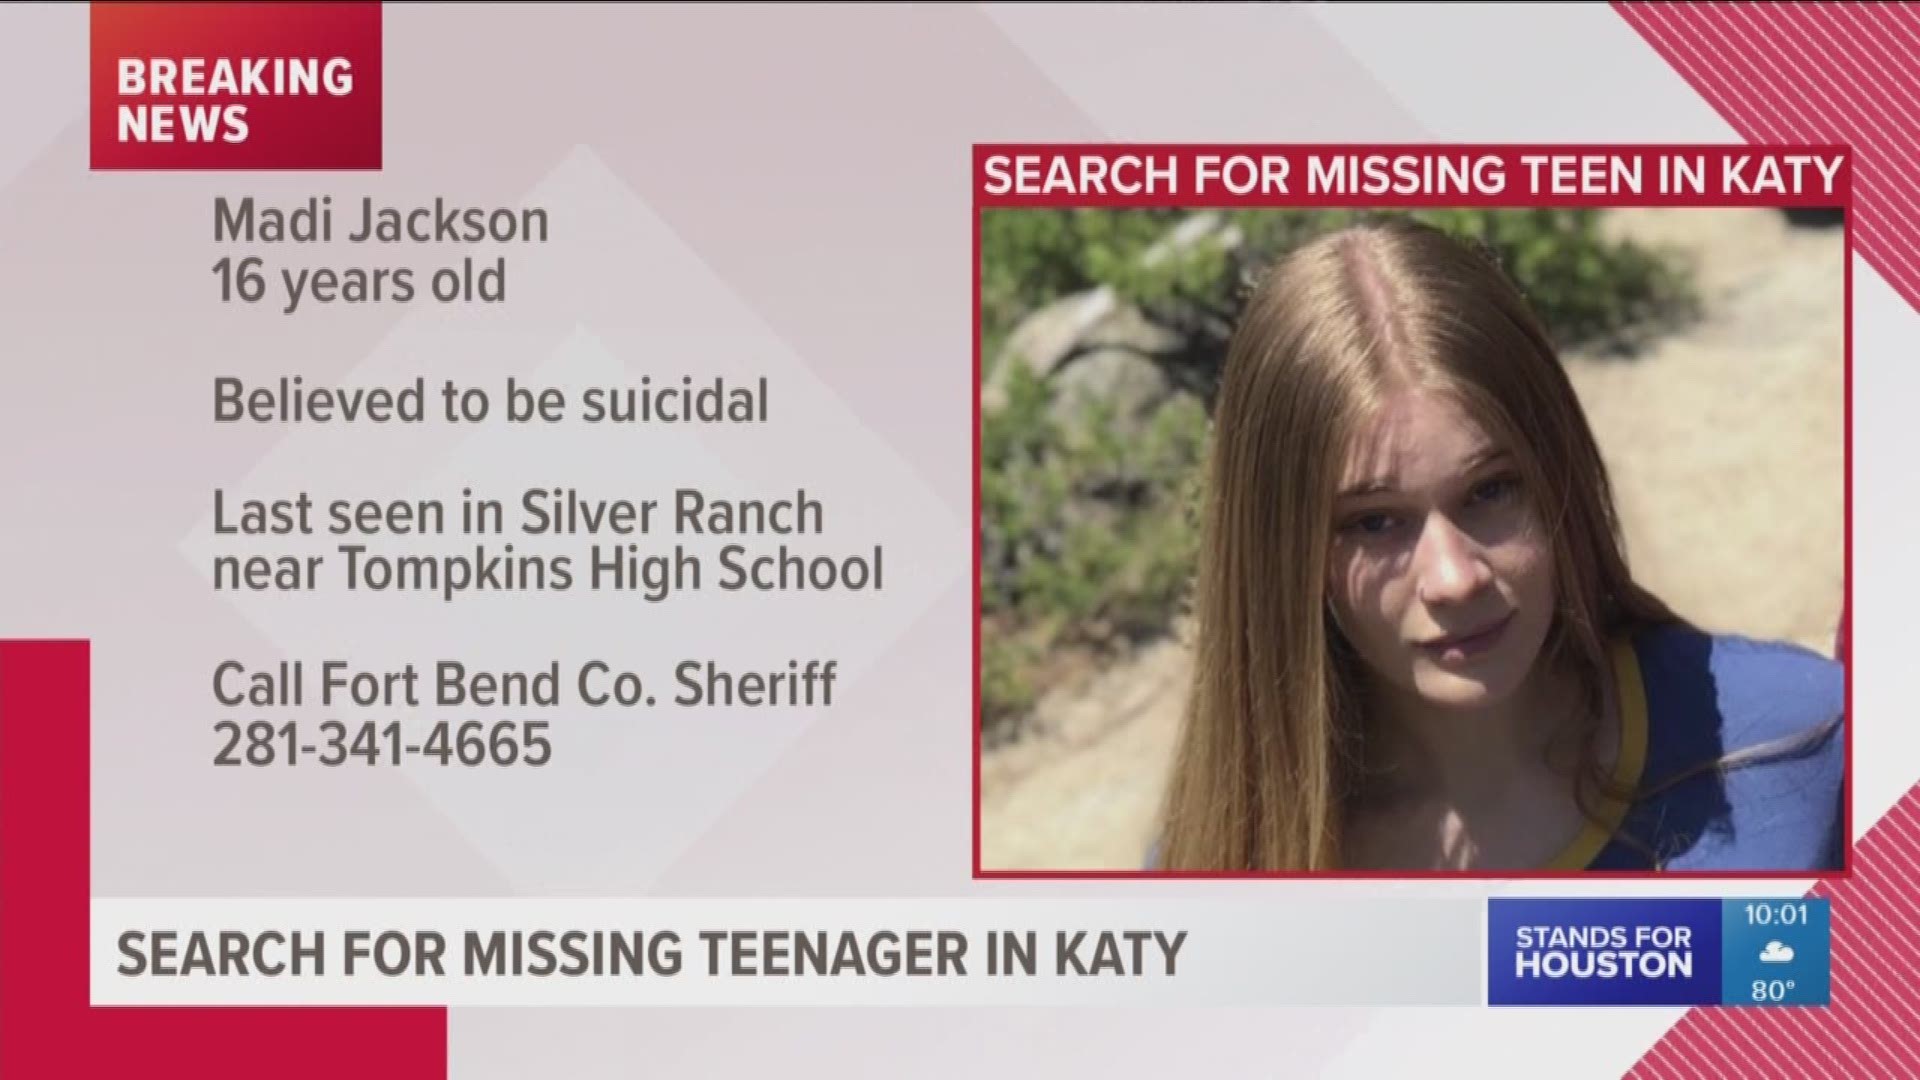 Fort Bend County deputies need the public's help with locating Madi Jackson, 16. She was last seen near Tompkins High School and is believed to be suicidal. 